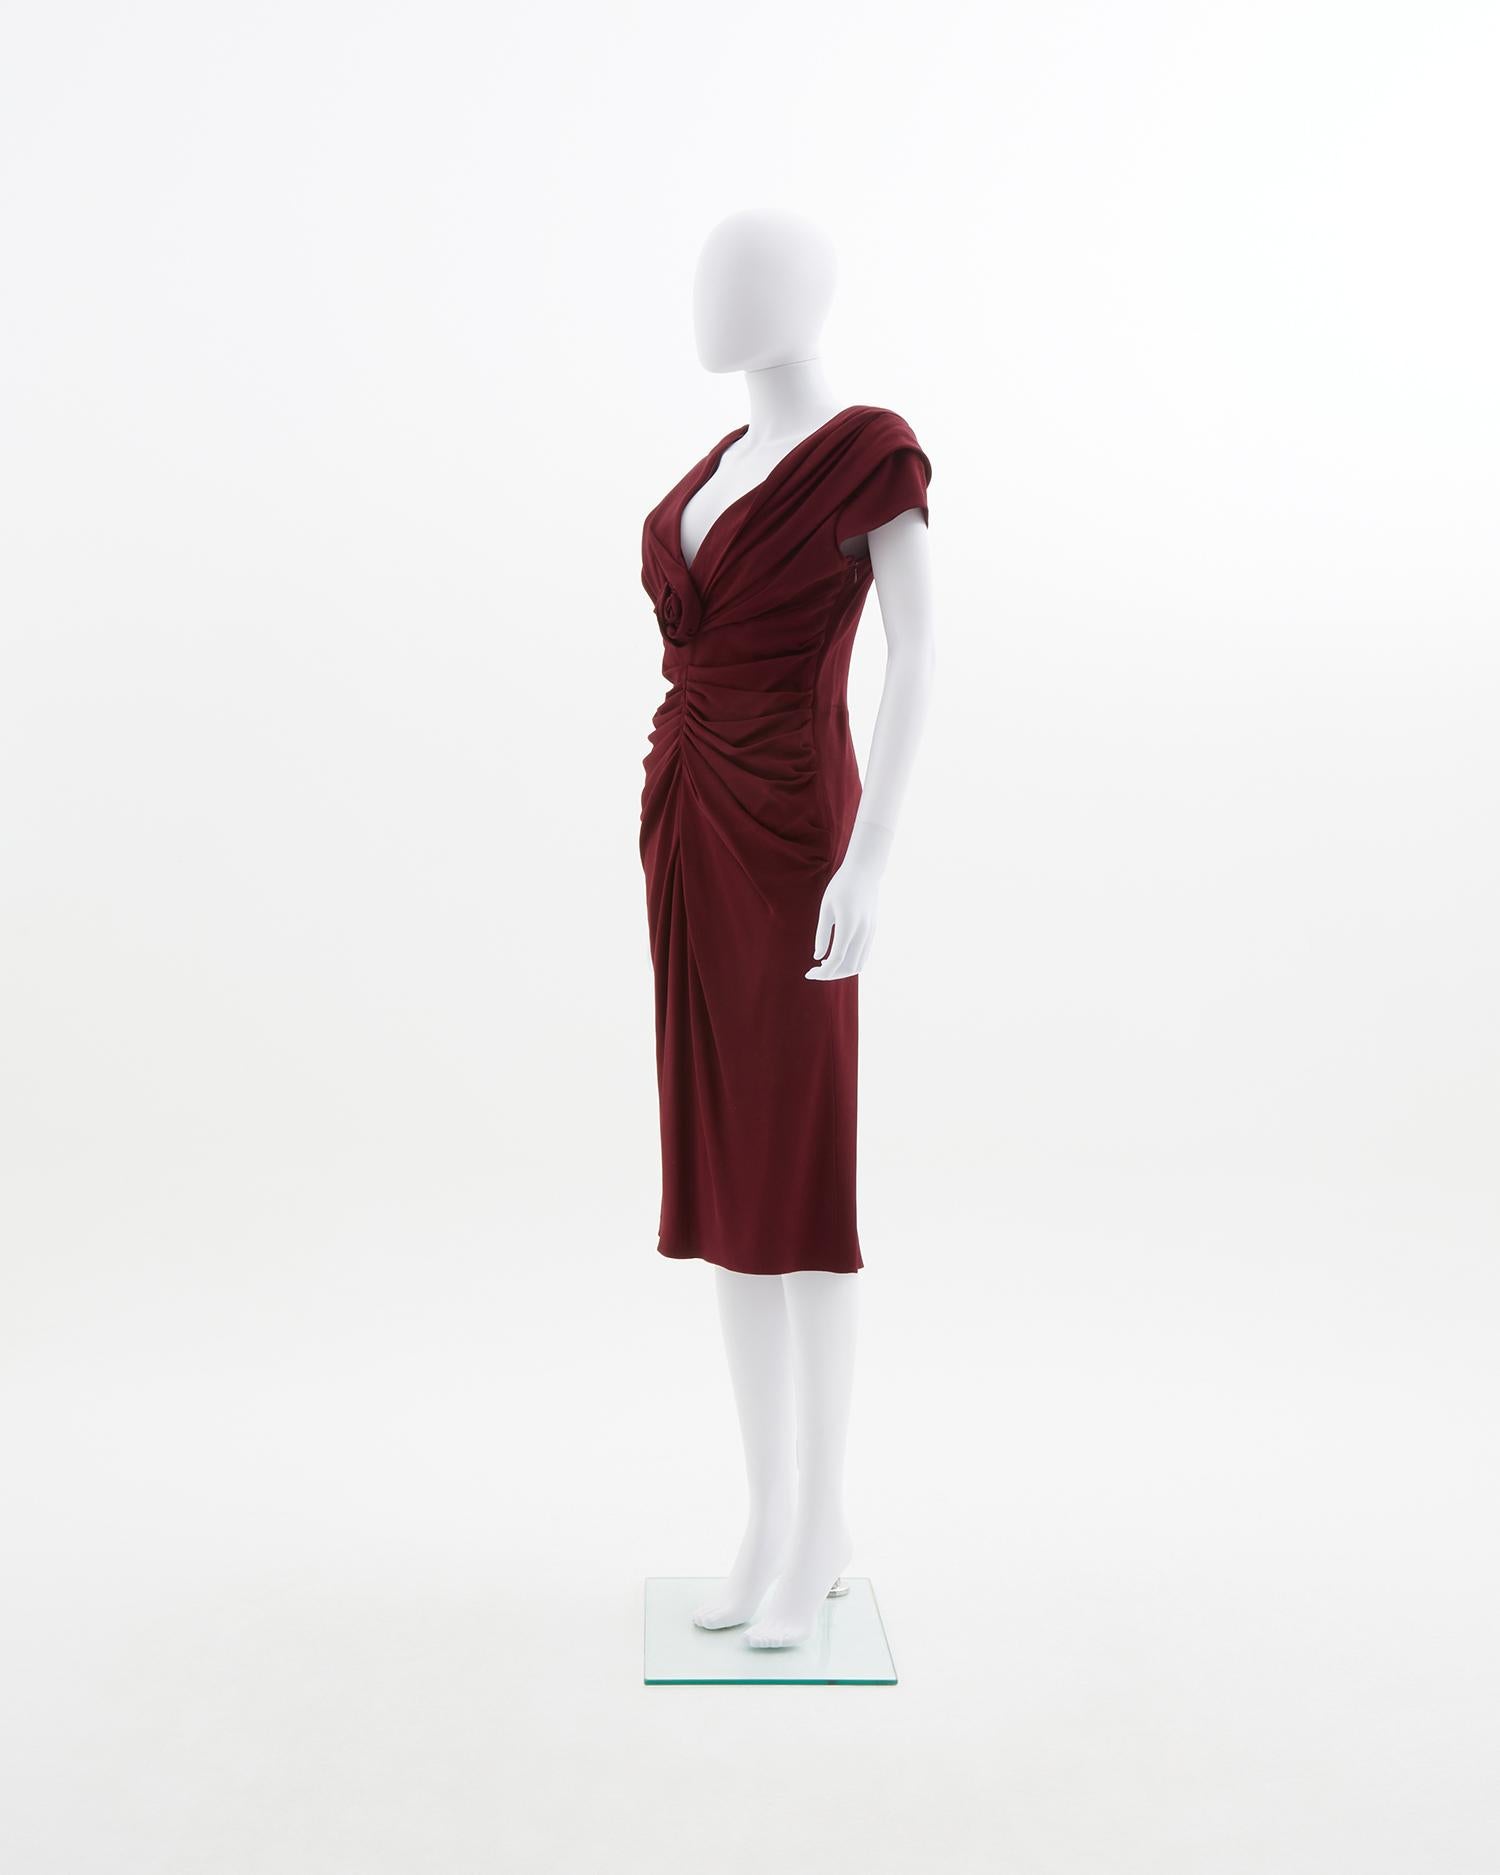 - Designed by John Galliano
- Sold by Skof.Archive
- Cowl neckline
- Above knee-length 
- Hidden side zipper
- Draped bow with rose detail 
- Size label removed 
- Fall Winter 2008

Size:
Aproximate 
FR 38 - IT 42 - UK 10 - US 6 (EU)

Measurements: